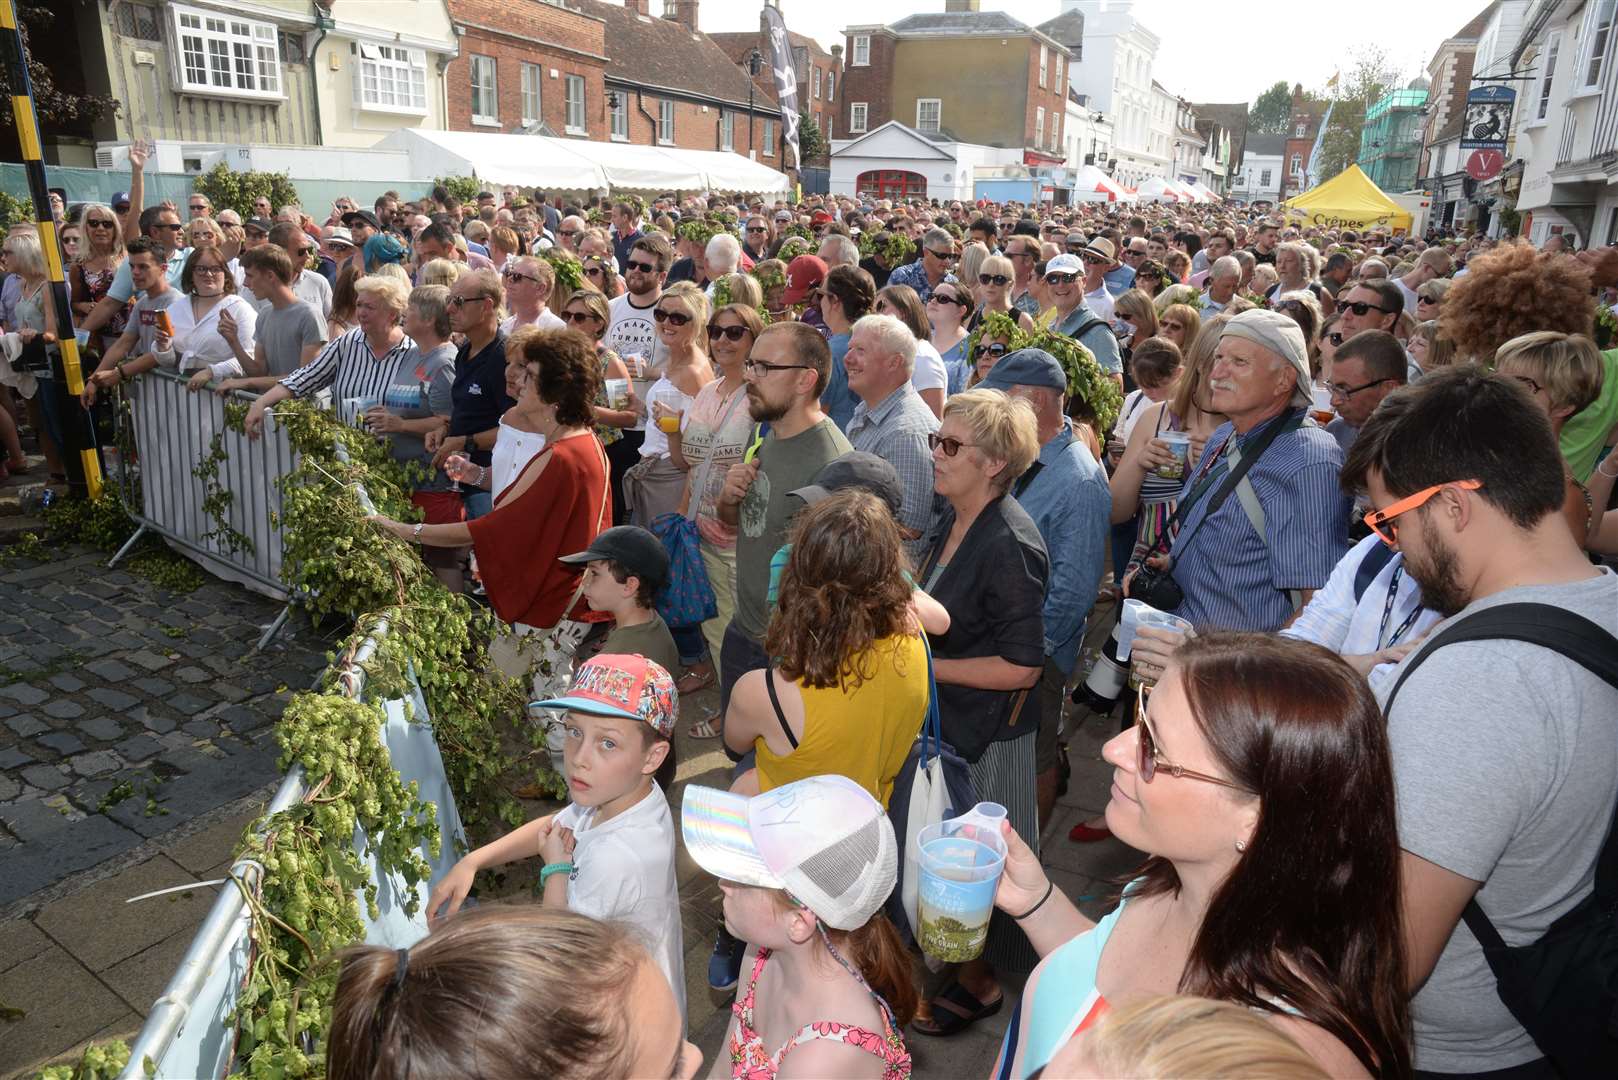 The festival is the biggest event held in Faversham